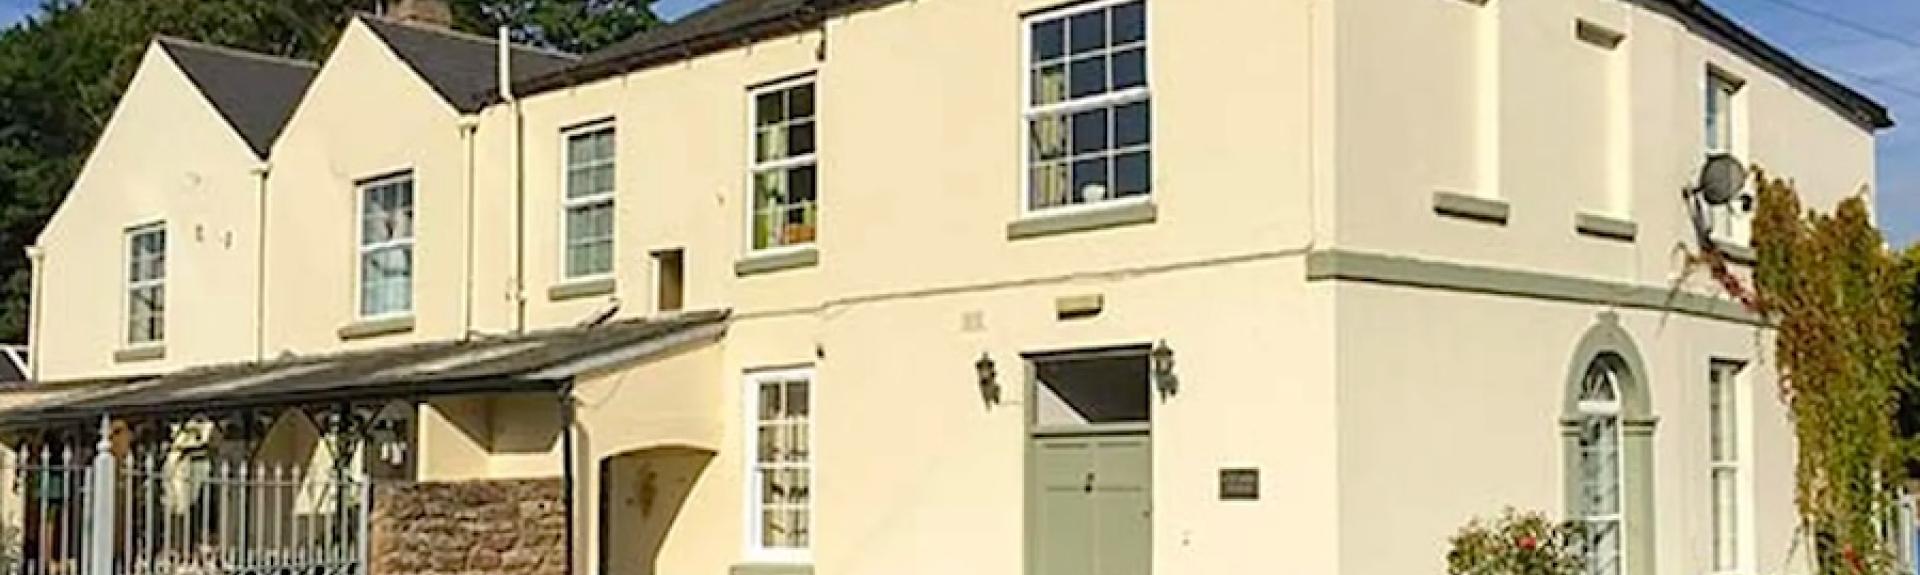 A large, rendered Hereford holiday home with large sash windows overlooks a spacious paved courtyard.